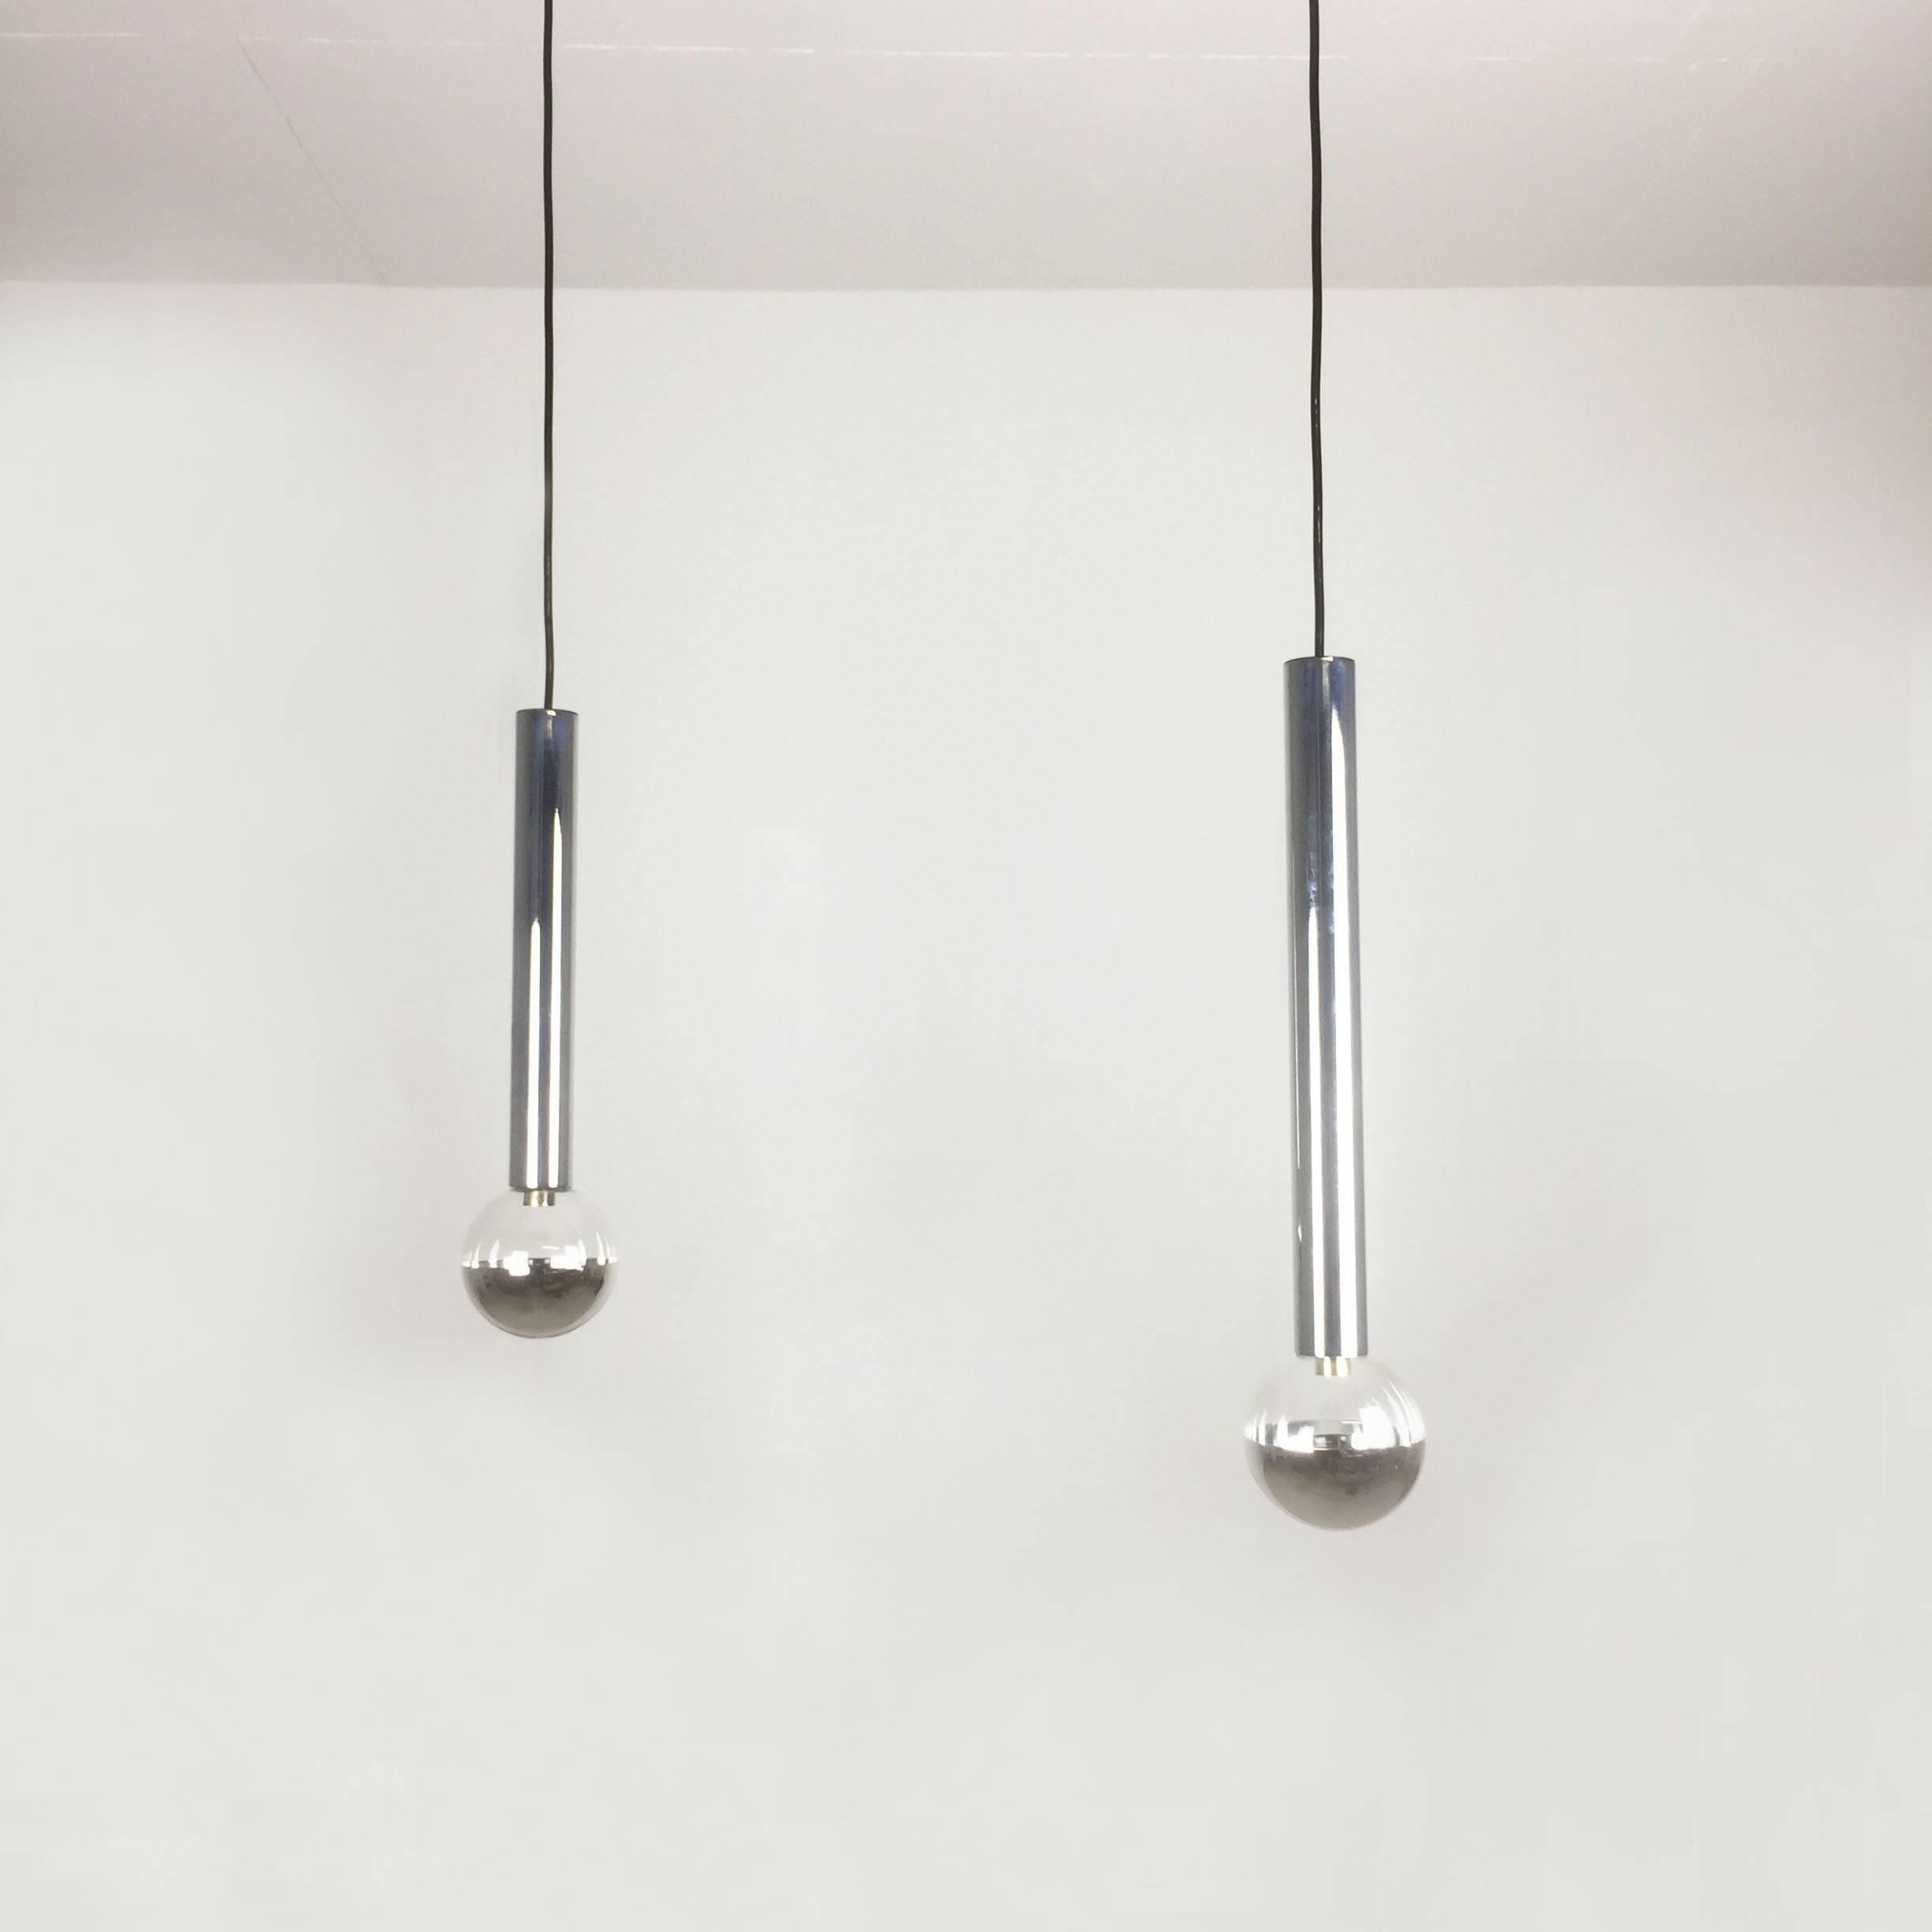 Article:

set of two tube hanging lights



Producer: 

Staff Lights, Germany

Design:

Motoko Ishii

Origin: 

Germany


Age: 

1970s



Description: 

This hanging light was designed by Motoko Ishii in the 1970s and